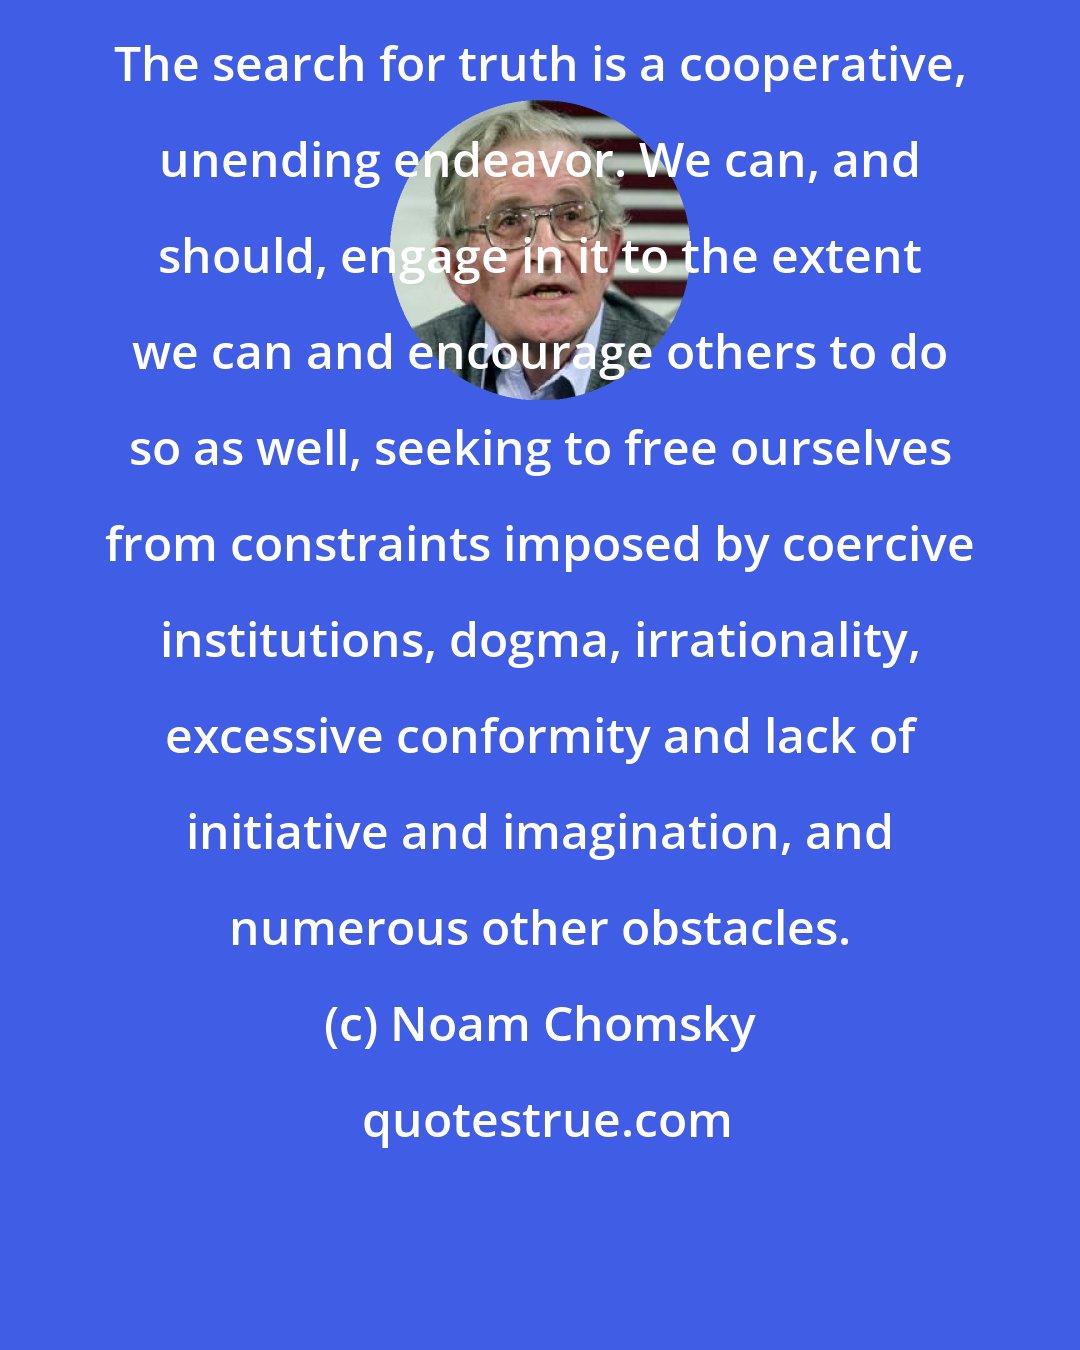 Noam Chomsky: The search for truth is a cooperative, unending endeavor. We can, and should, engage in it to the extent we can and encourage others to do so as well, seeking to free ourselves from constraints imposed by coercive institutions, dogma, irrationality, excessive conformity and lack of initiative and imagination, and numerous other obstacles.